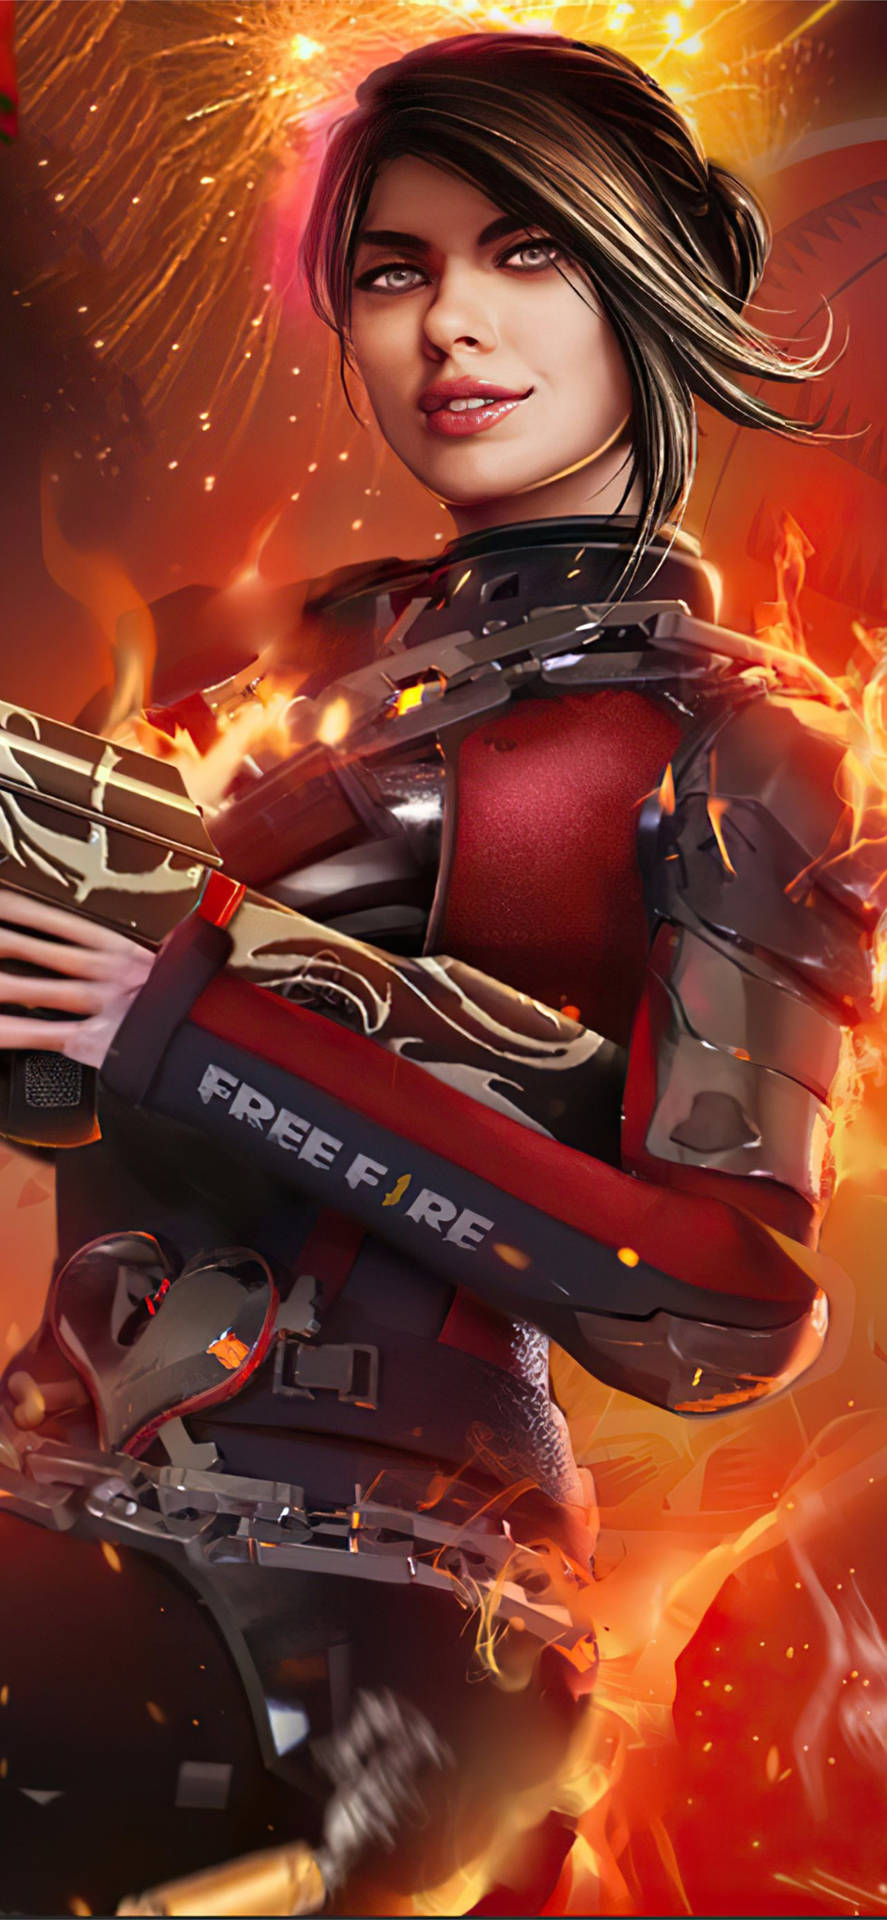 Free Fire Season 1 Red Body Suit Picture